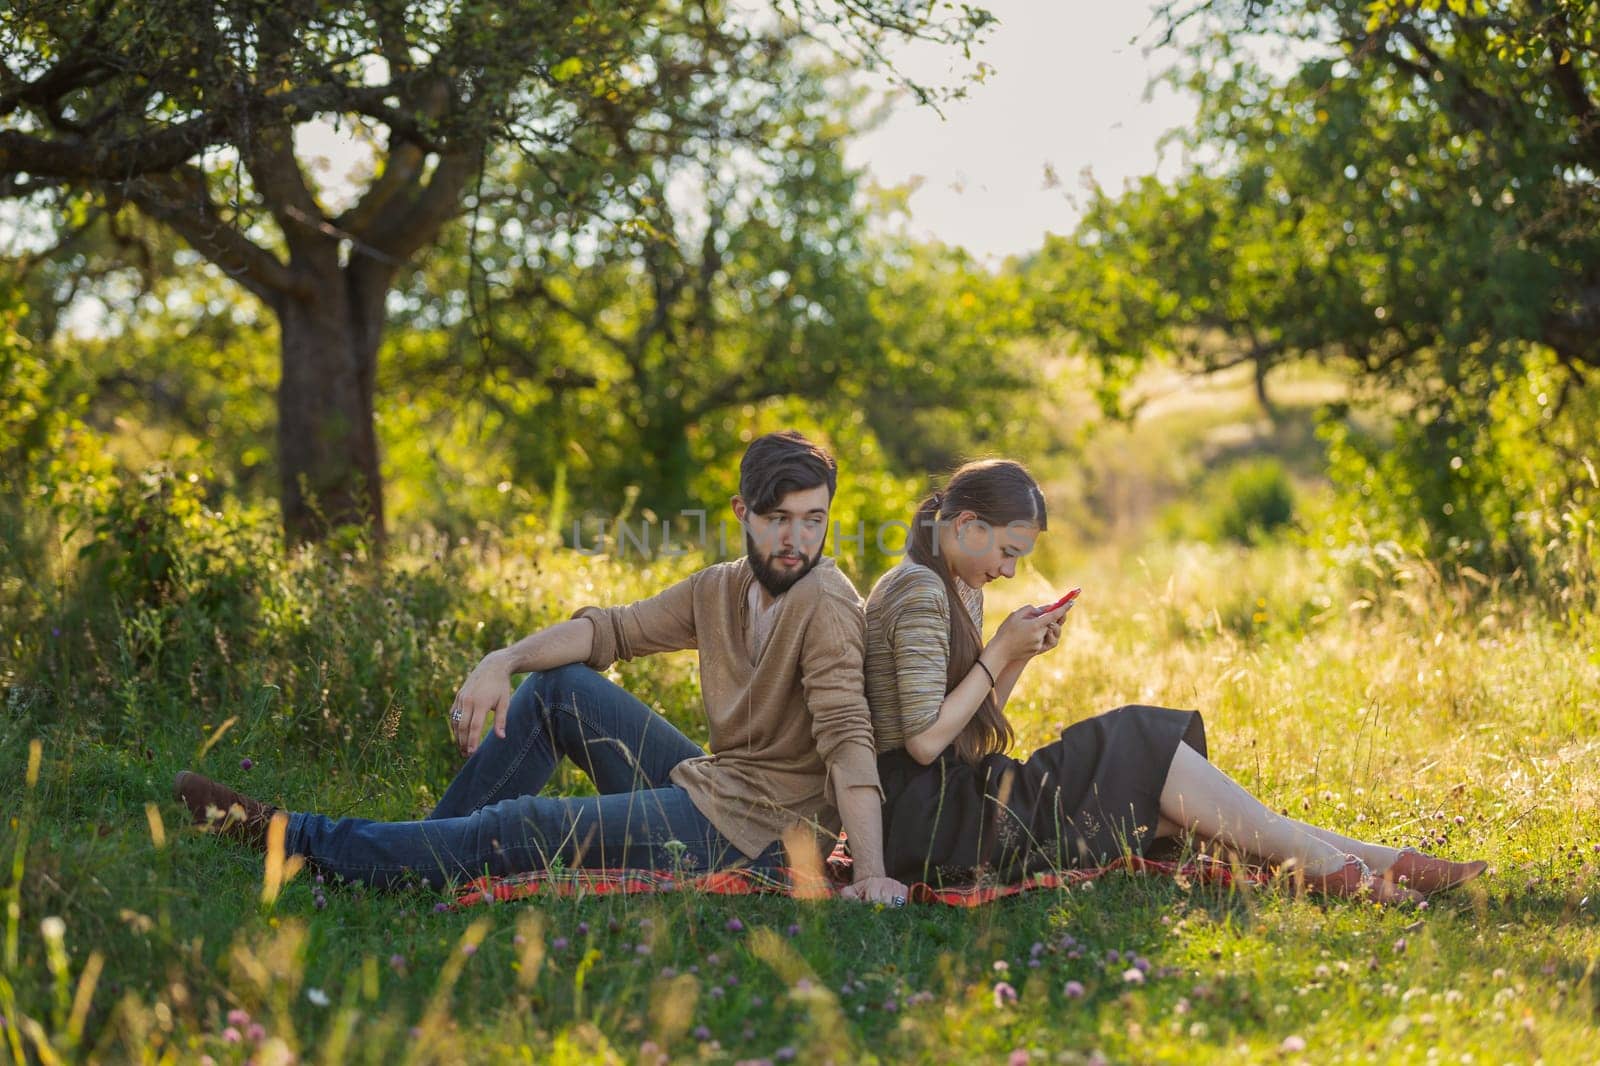 Young couple in nature, a girl with a phone is texting someone